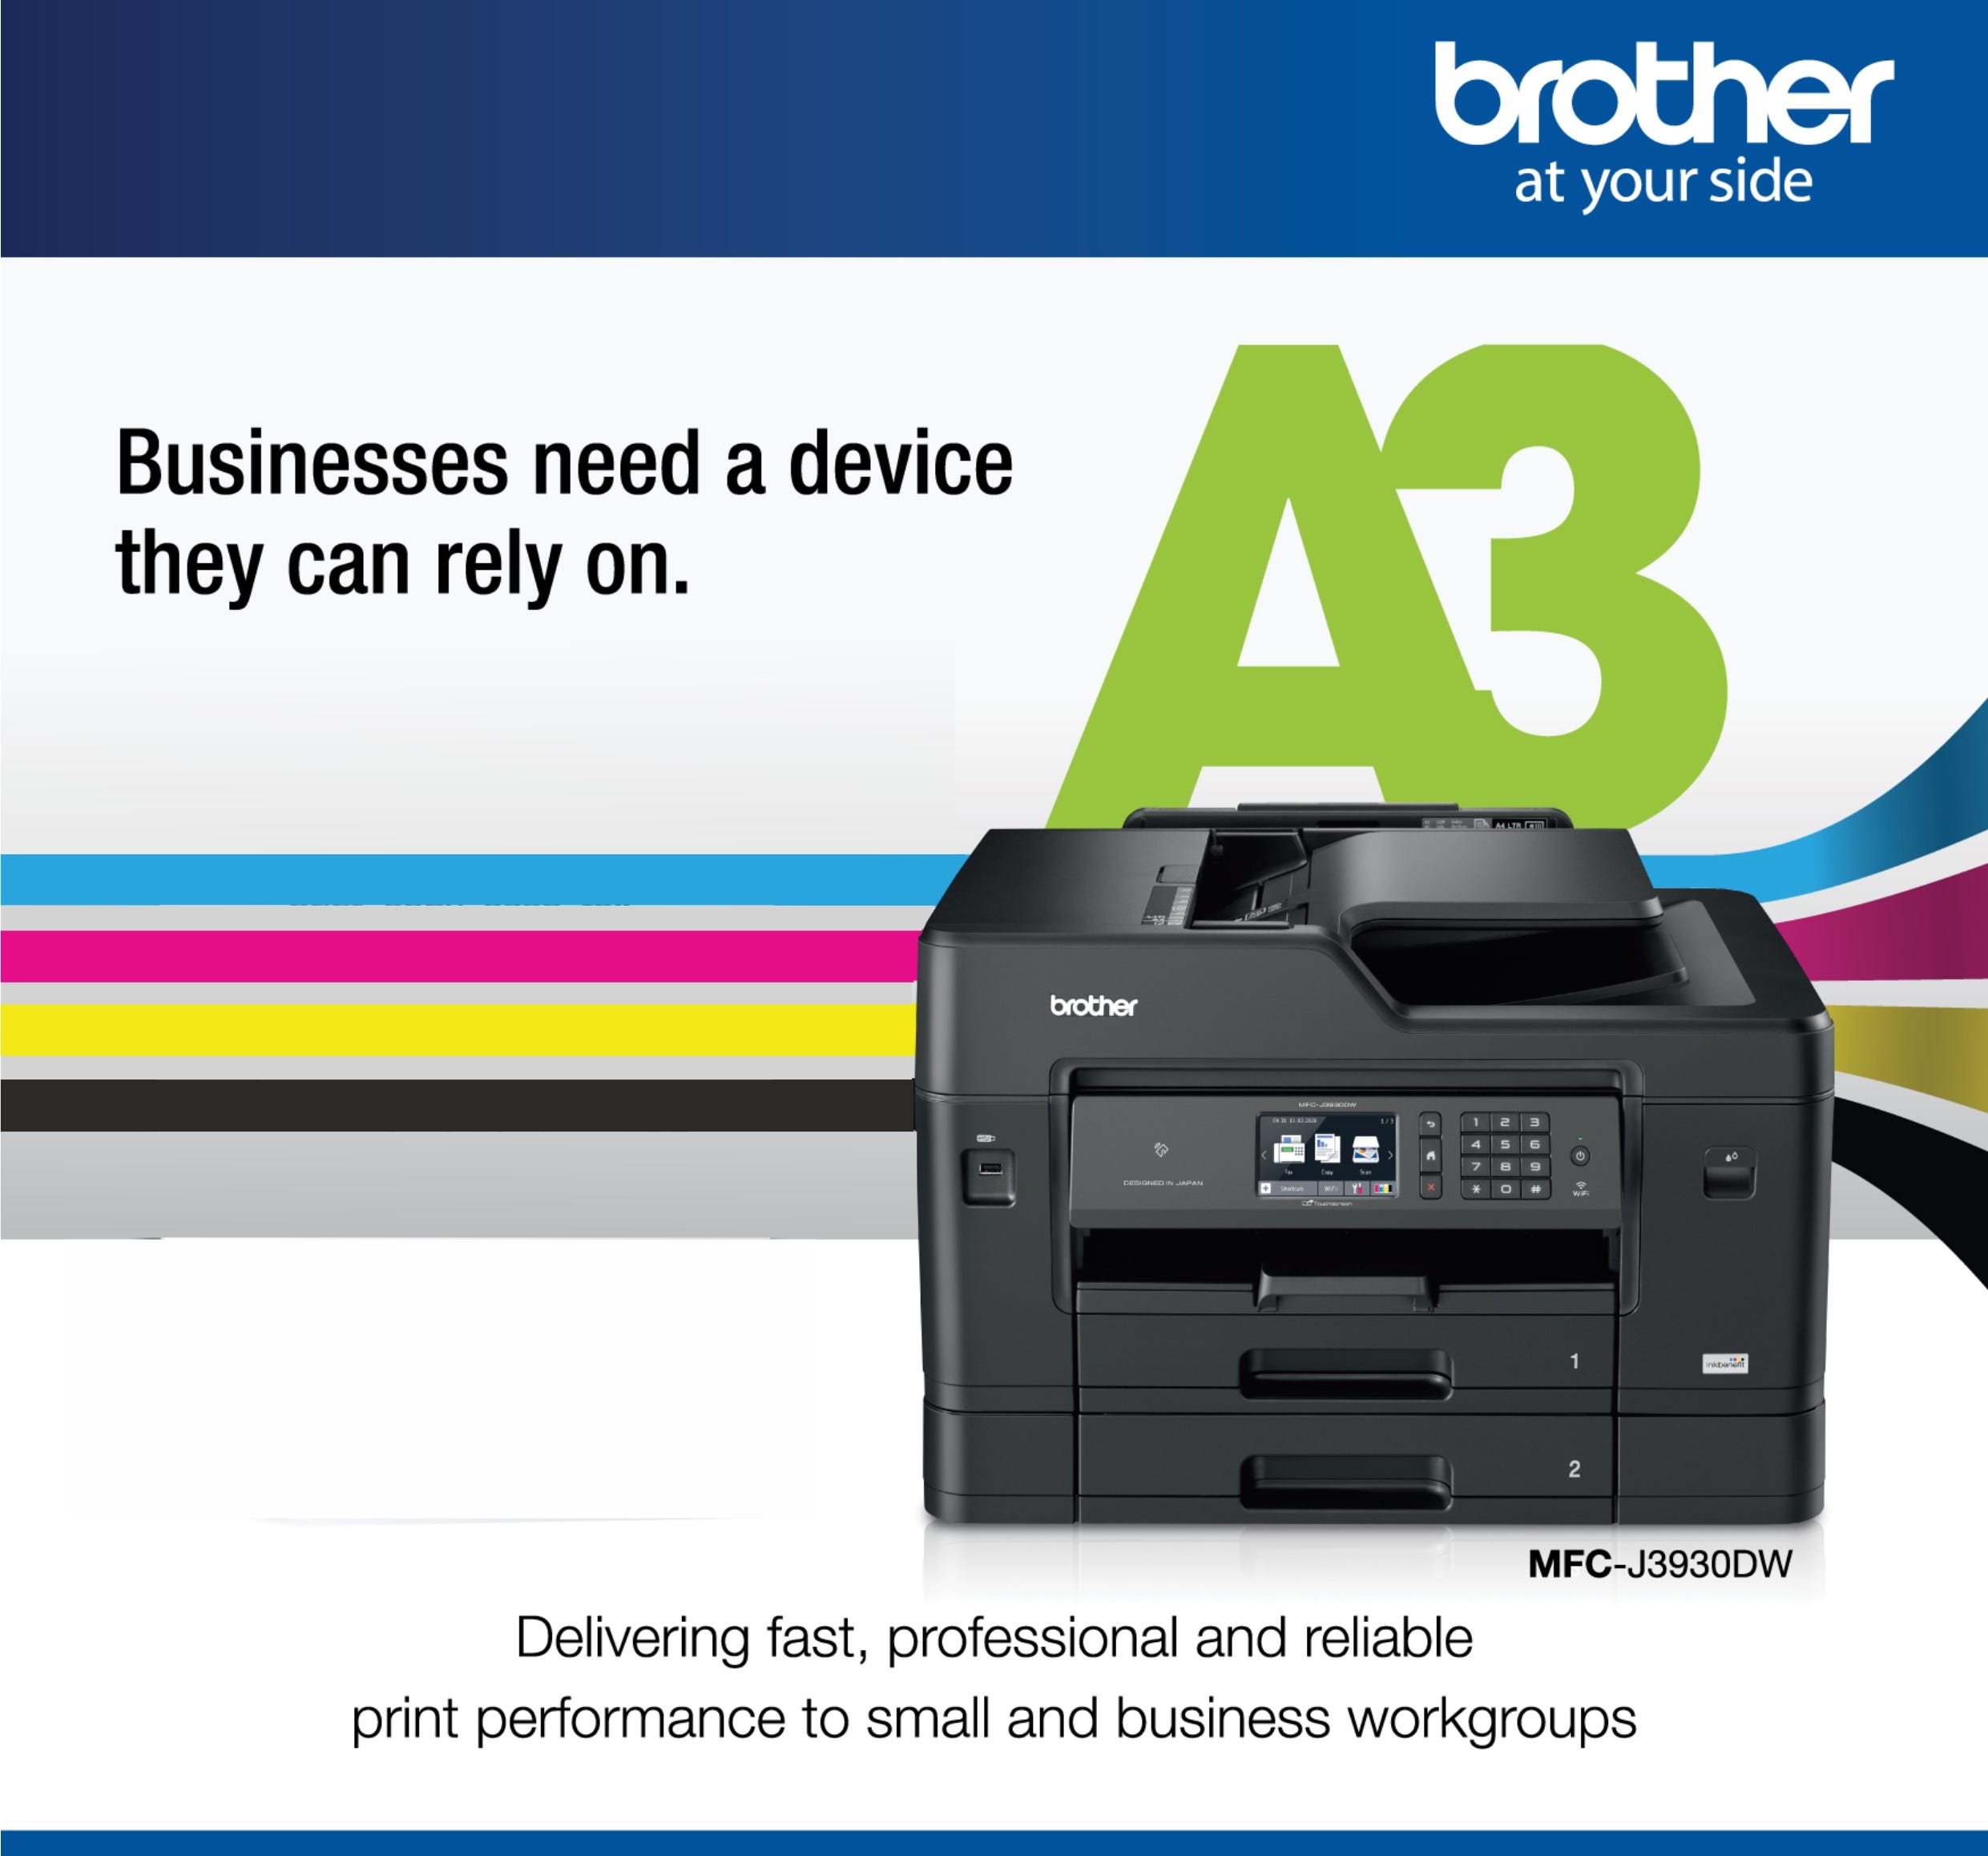 sommer Flagermus melodramatiske INTRODUCING BROTHER ALL-IN-ONE A3 INKJET PRINTERS BUILT FOR BUSINESS